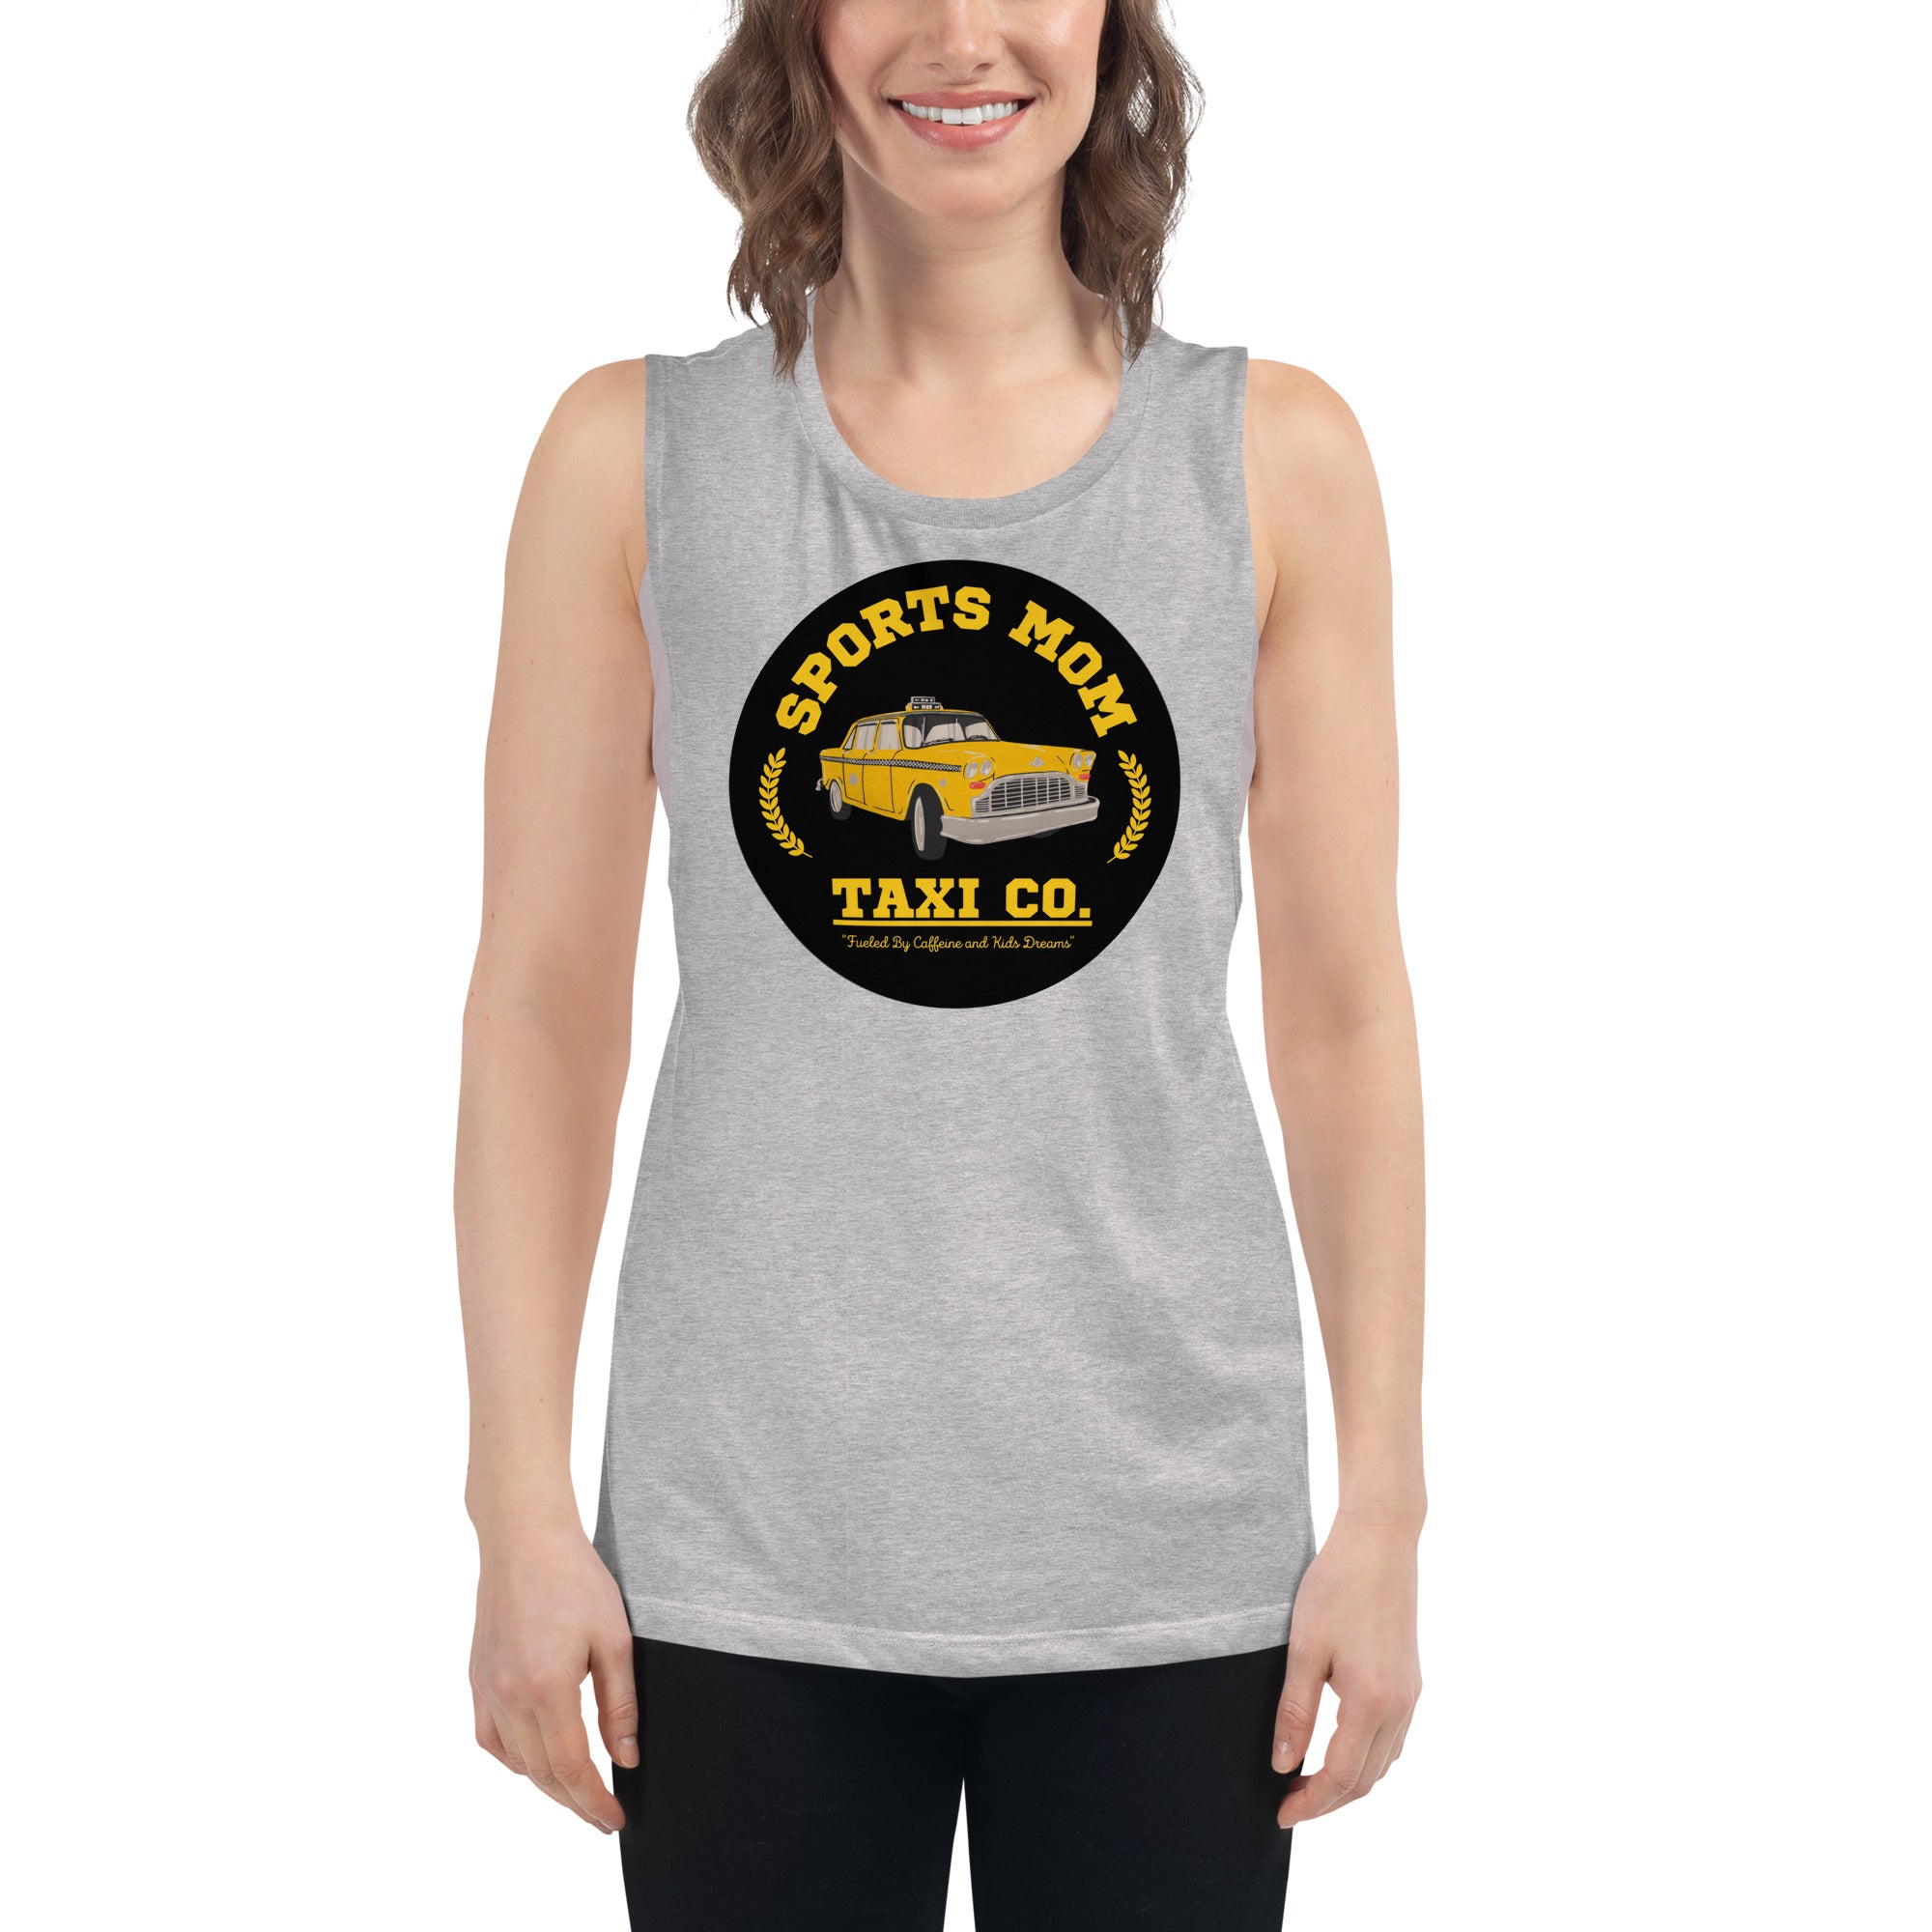 The Sports Mom Taxi Co. Original Muscle Tank